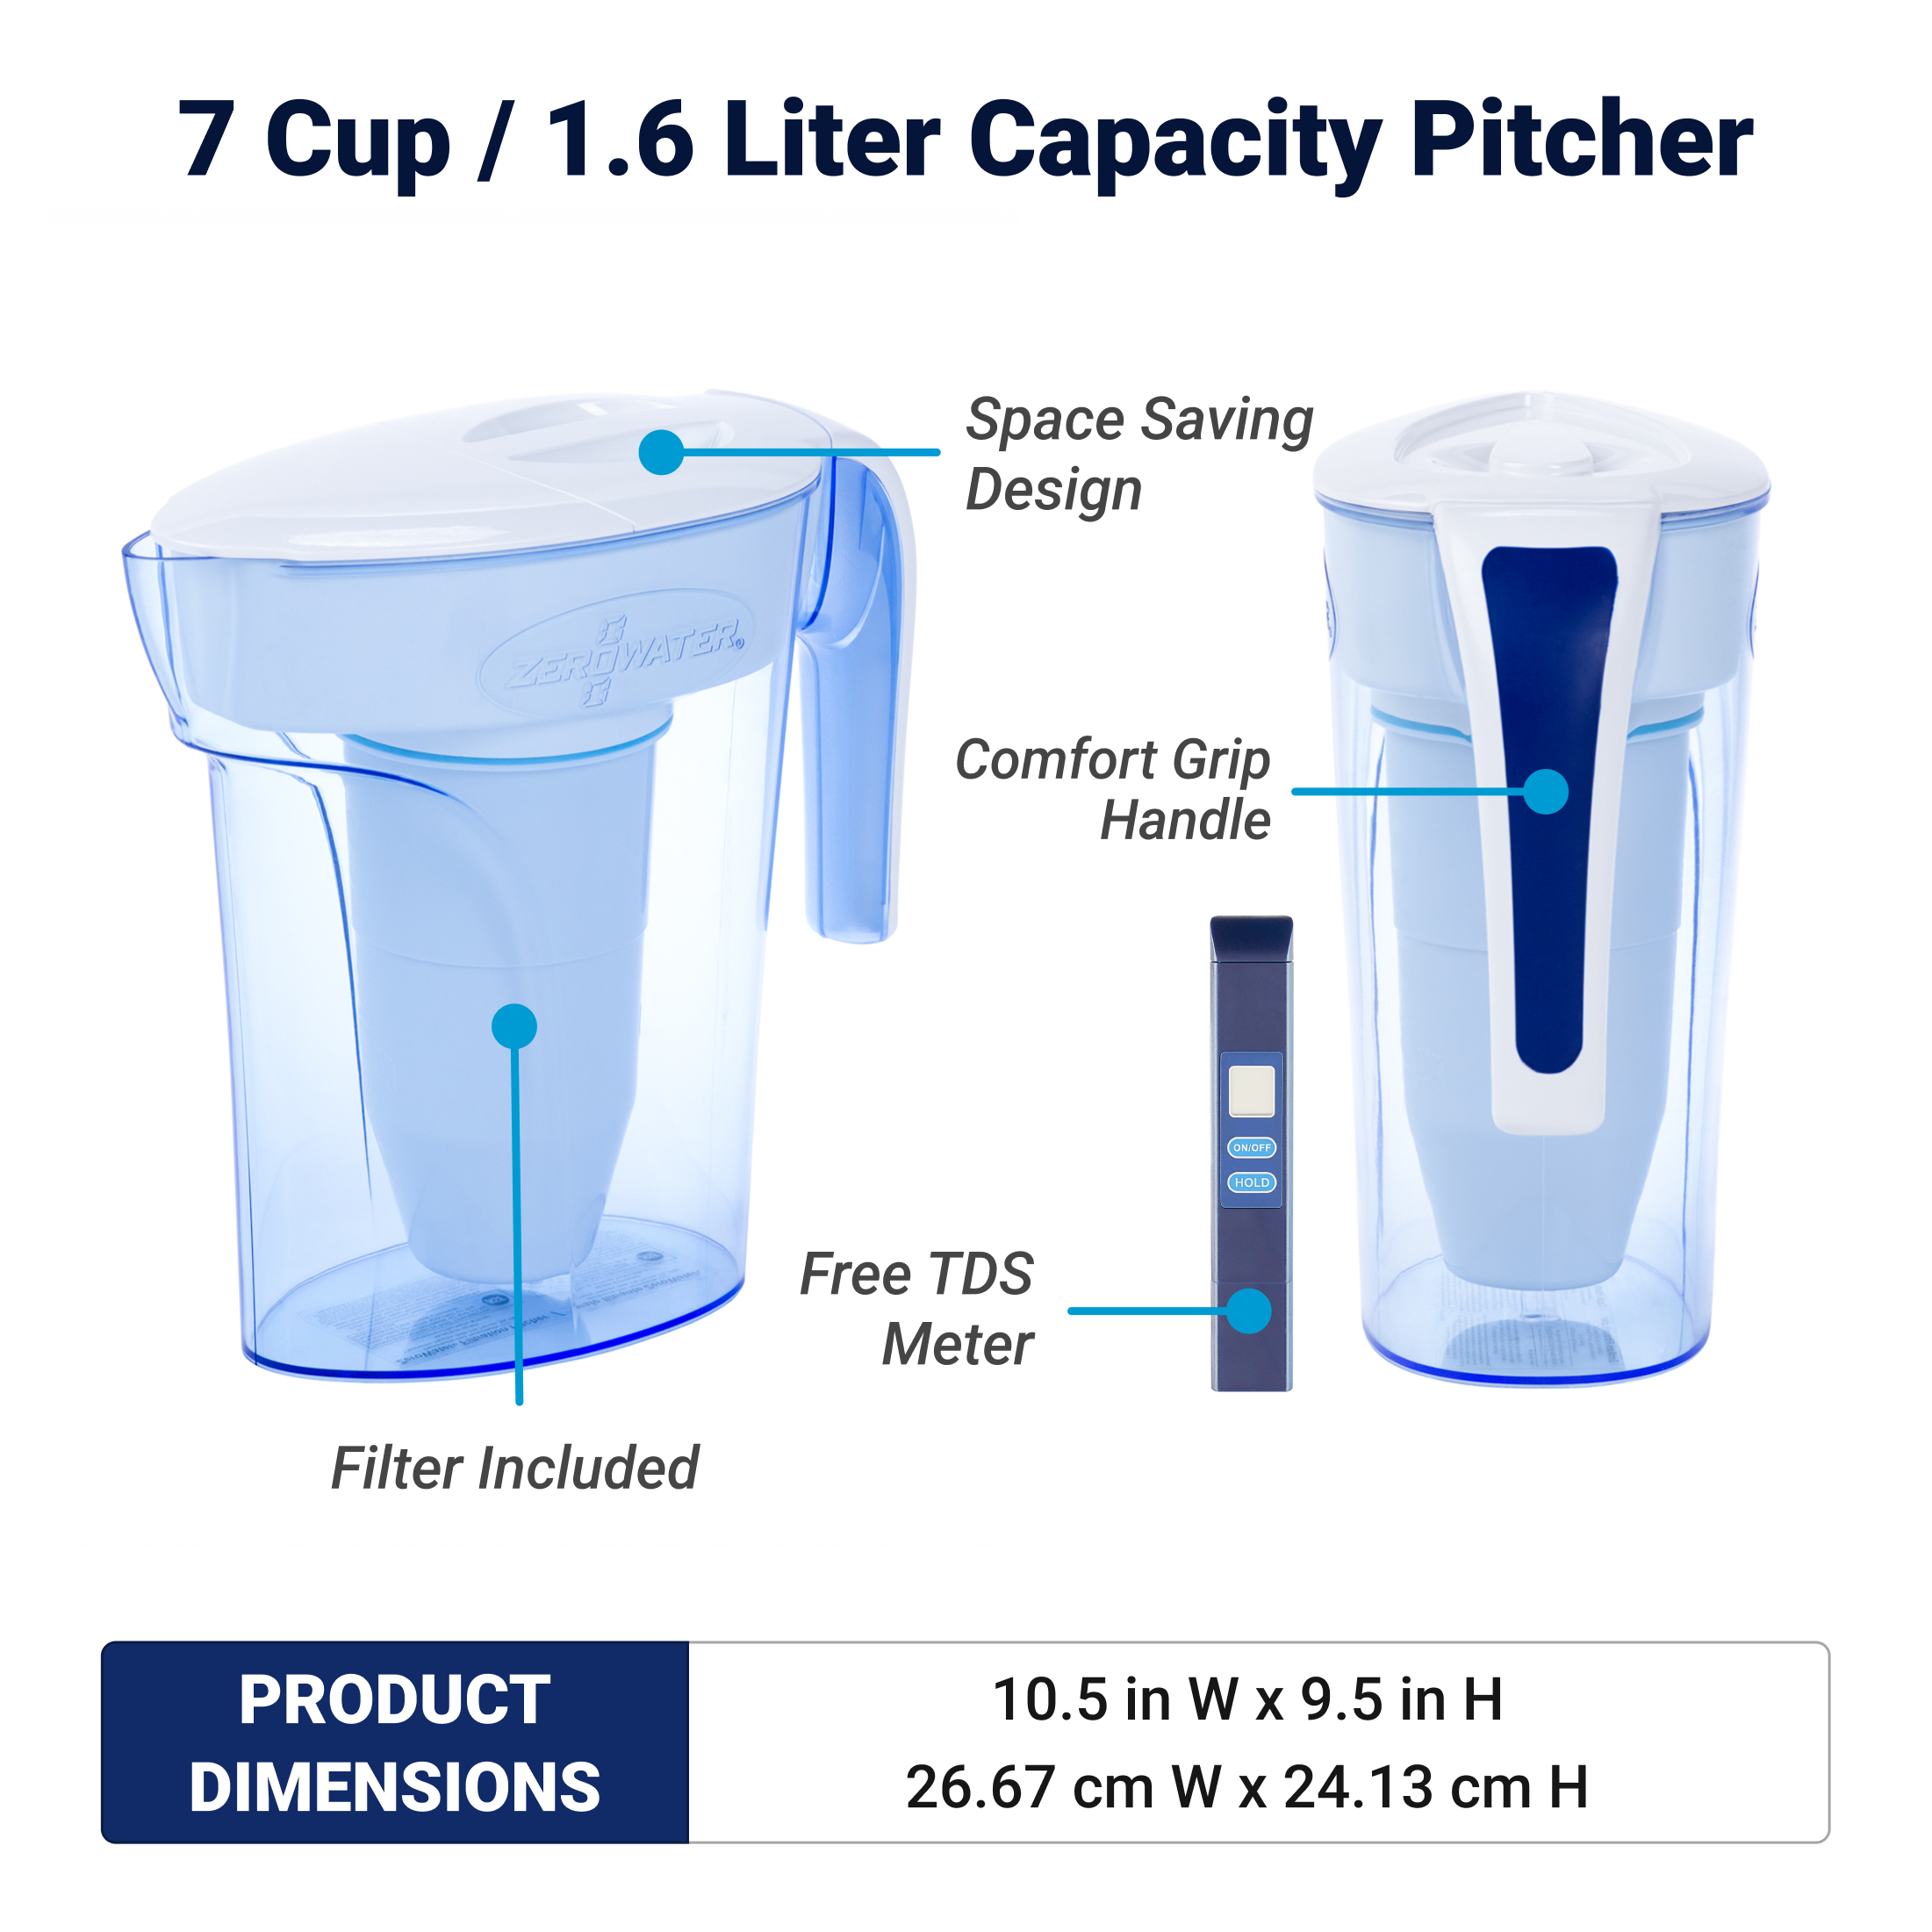 7 cup 1.6 liter capacity pitcher